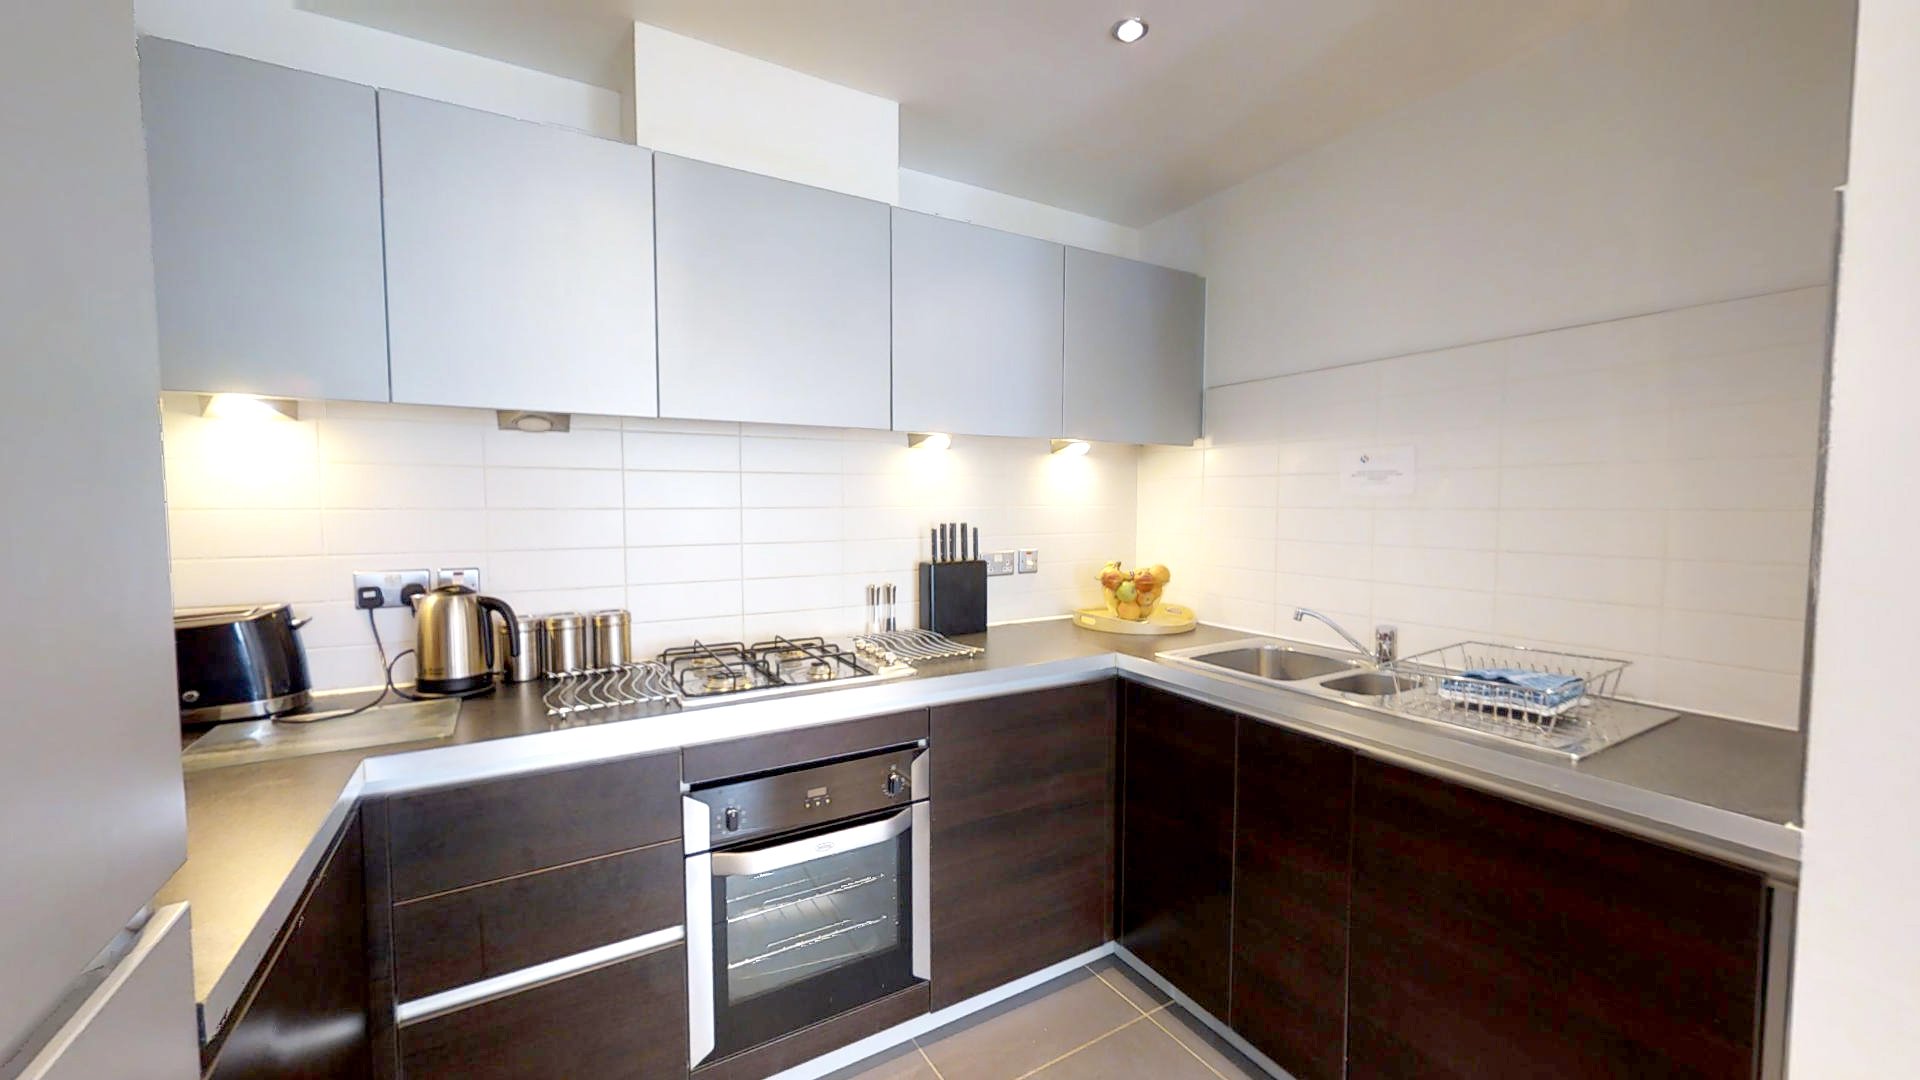 Serviced-Accommodation-Cambridge-|-Stylish-Short-let-apartments-|-Free-Wifi|-24h-reception-|-Fully-equipped-kitchen-|-0208-6913920|-Urban-Stay